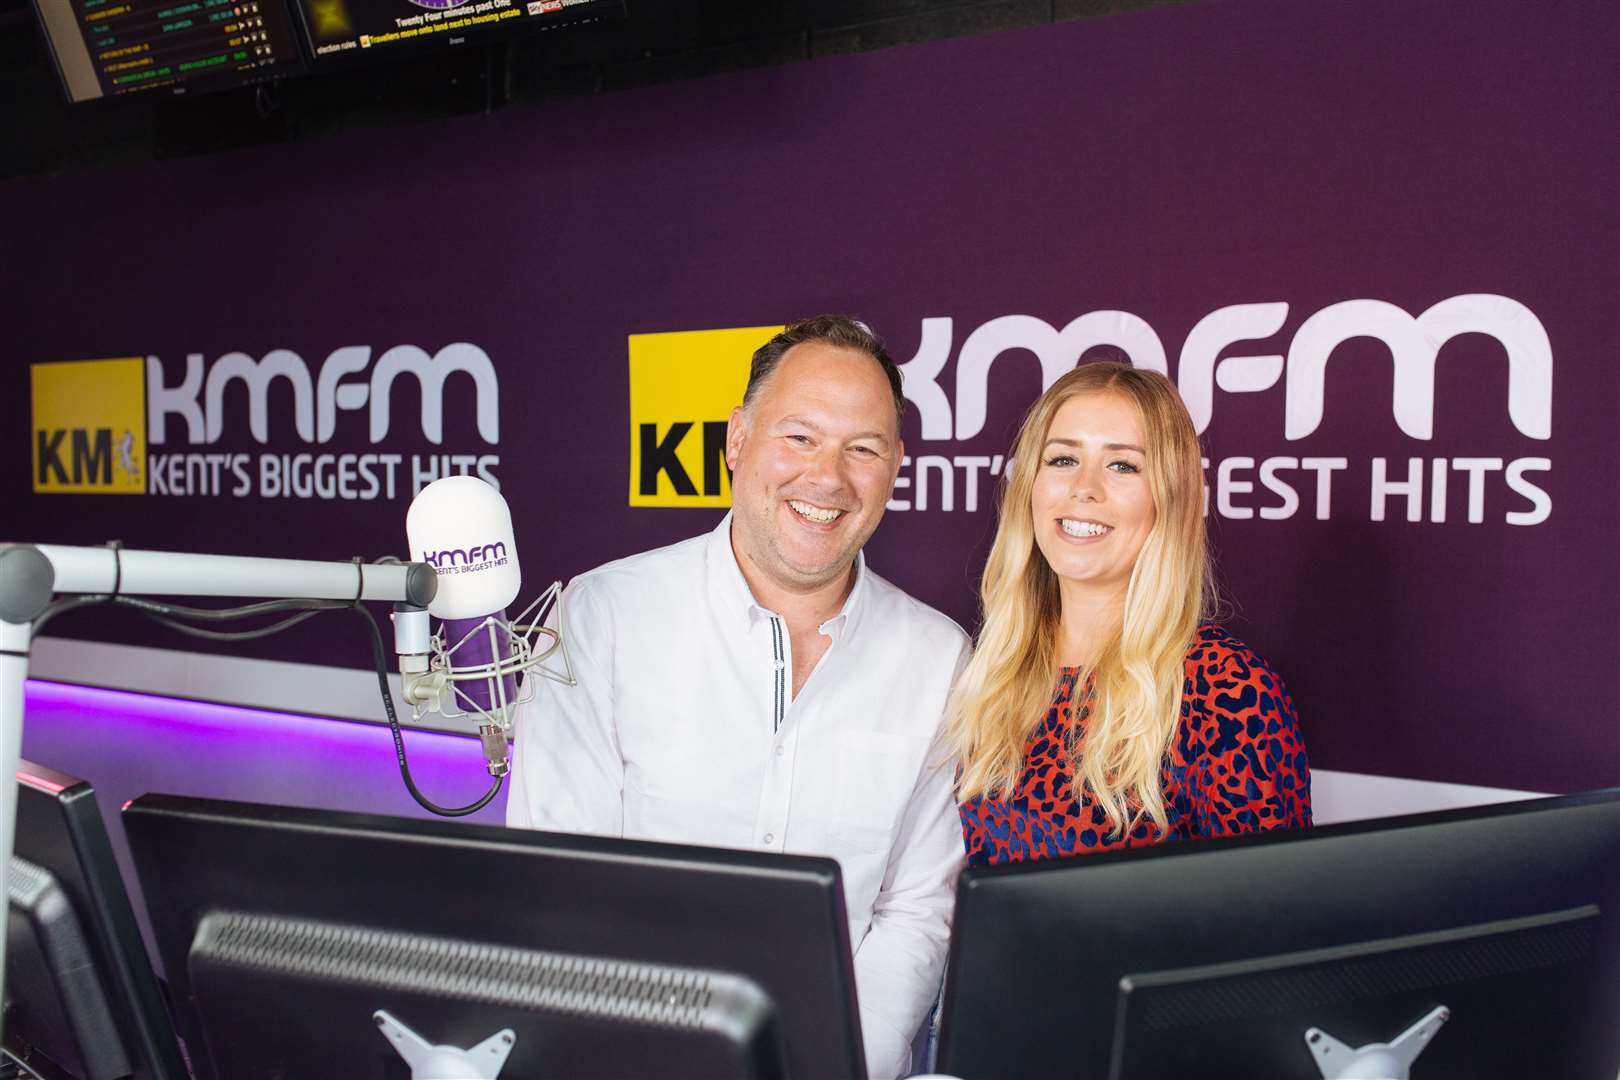 Even more people are listening to kmfm Breakfast with Garry and Laura